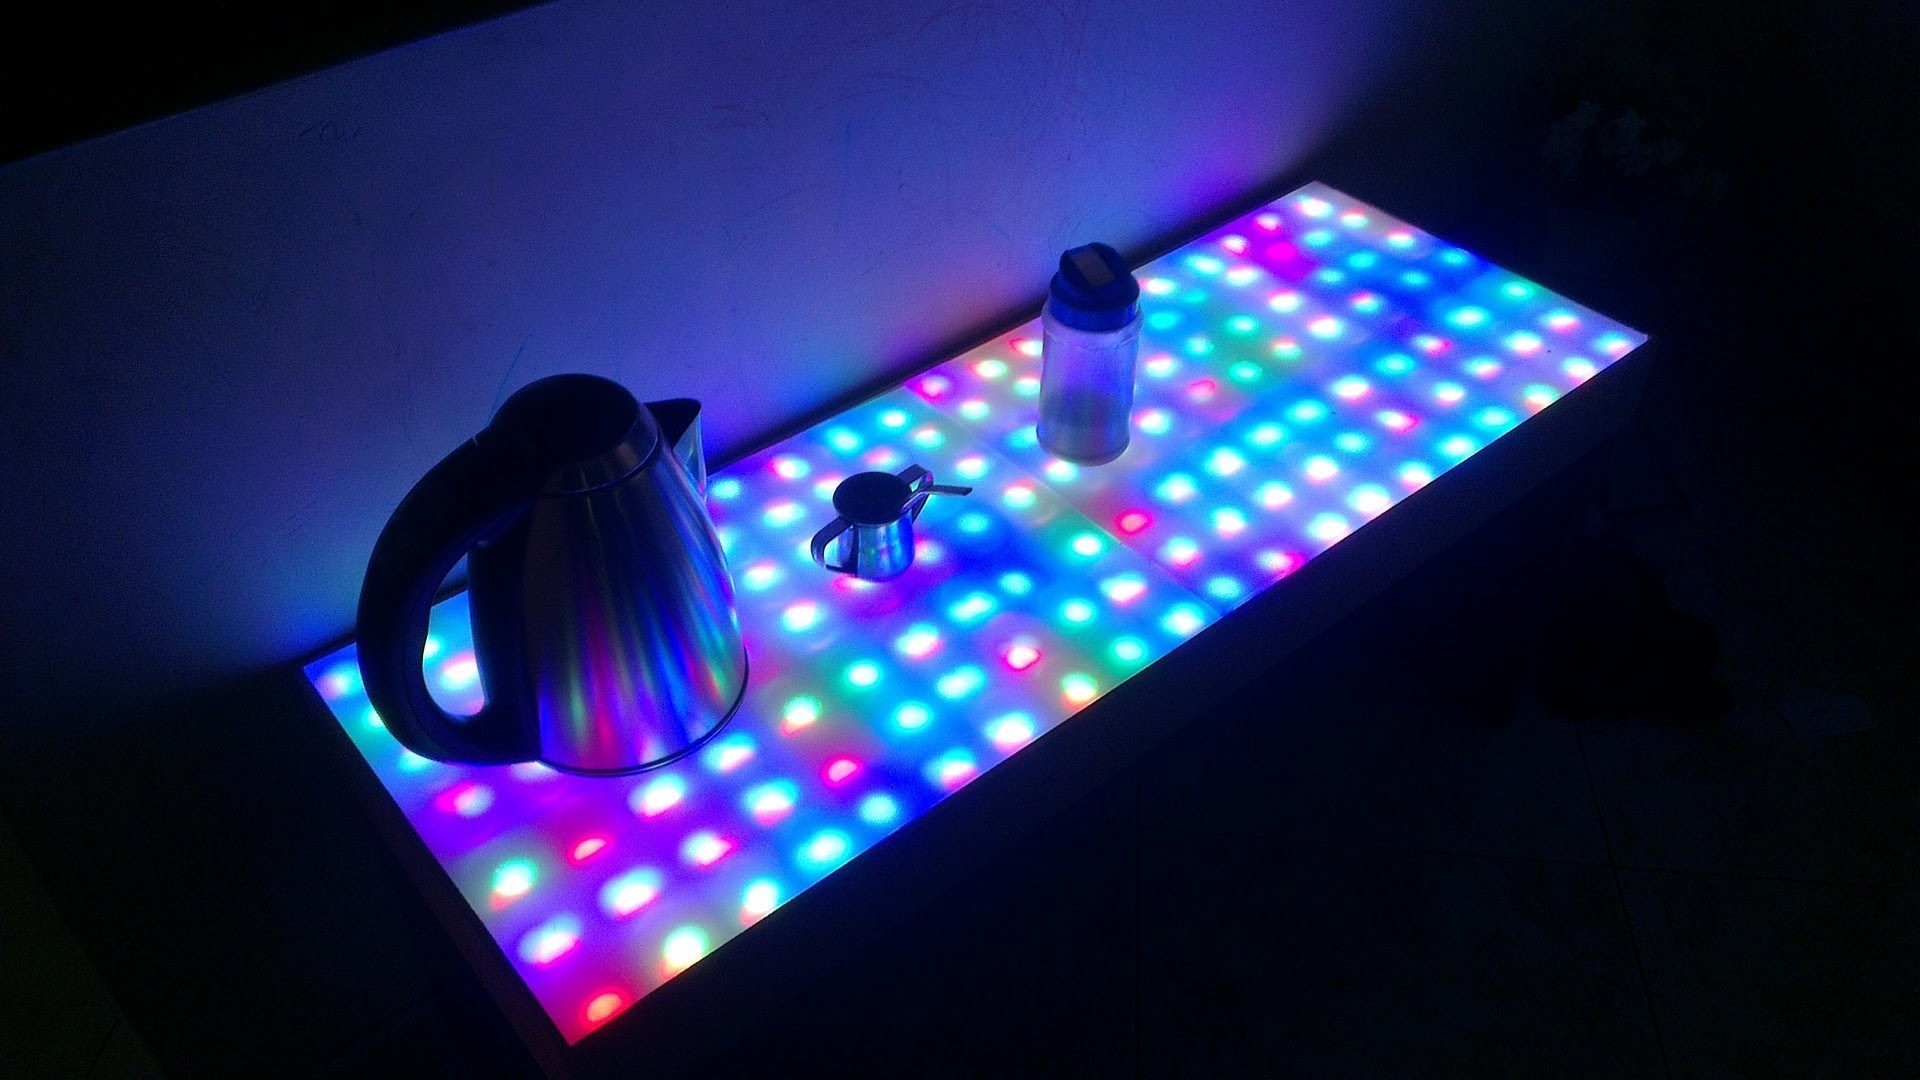 ProyectosLed #41: mesa led rgb, parte 3